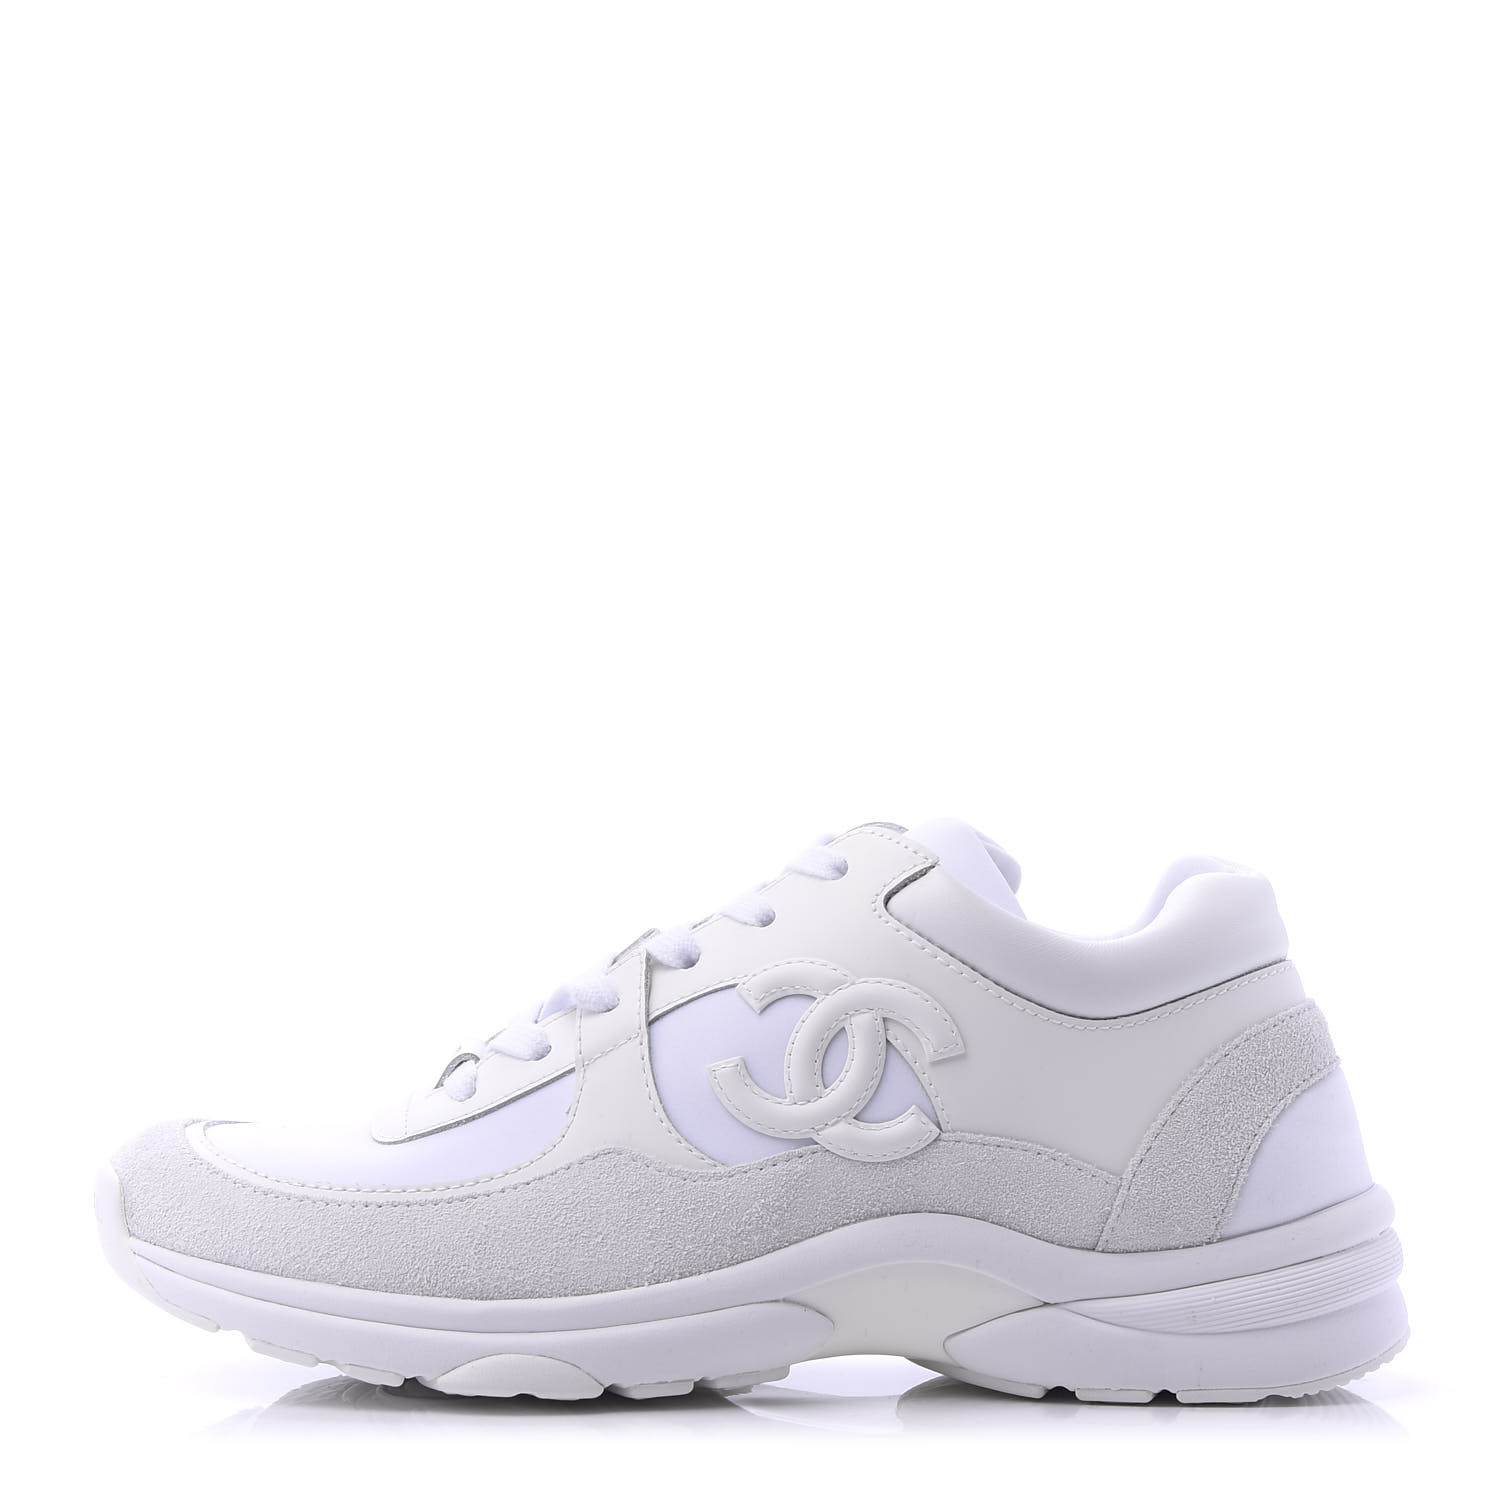 CHANEL Suede Calfskin Fabric CC Sneakers 39 White 614690